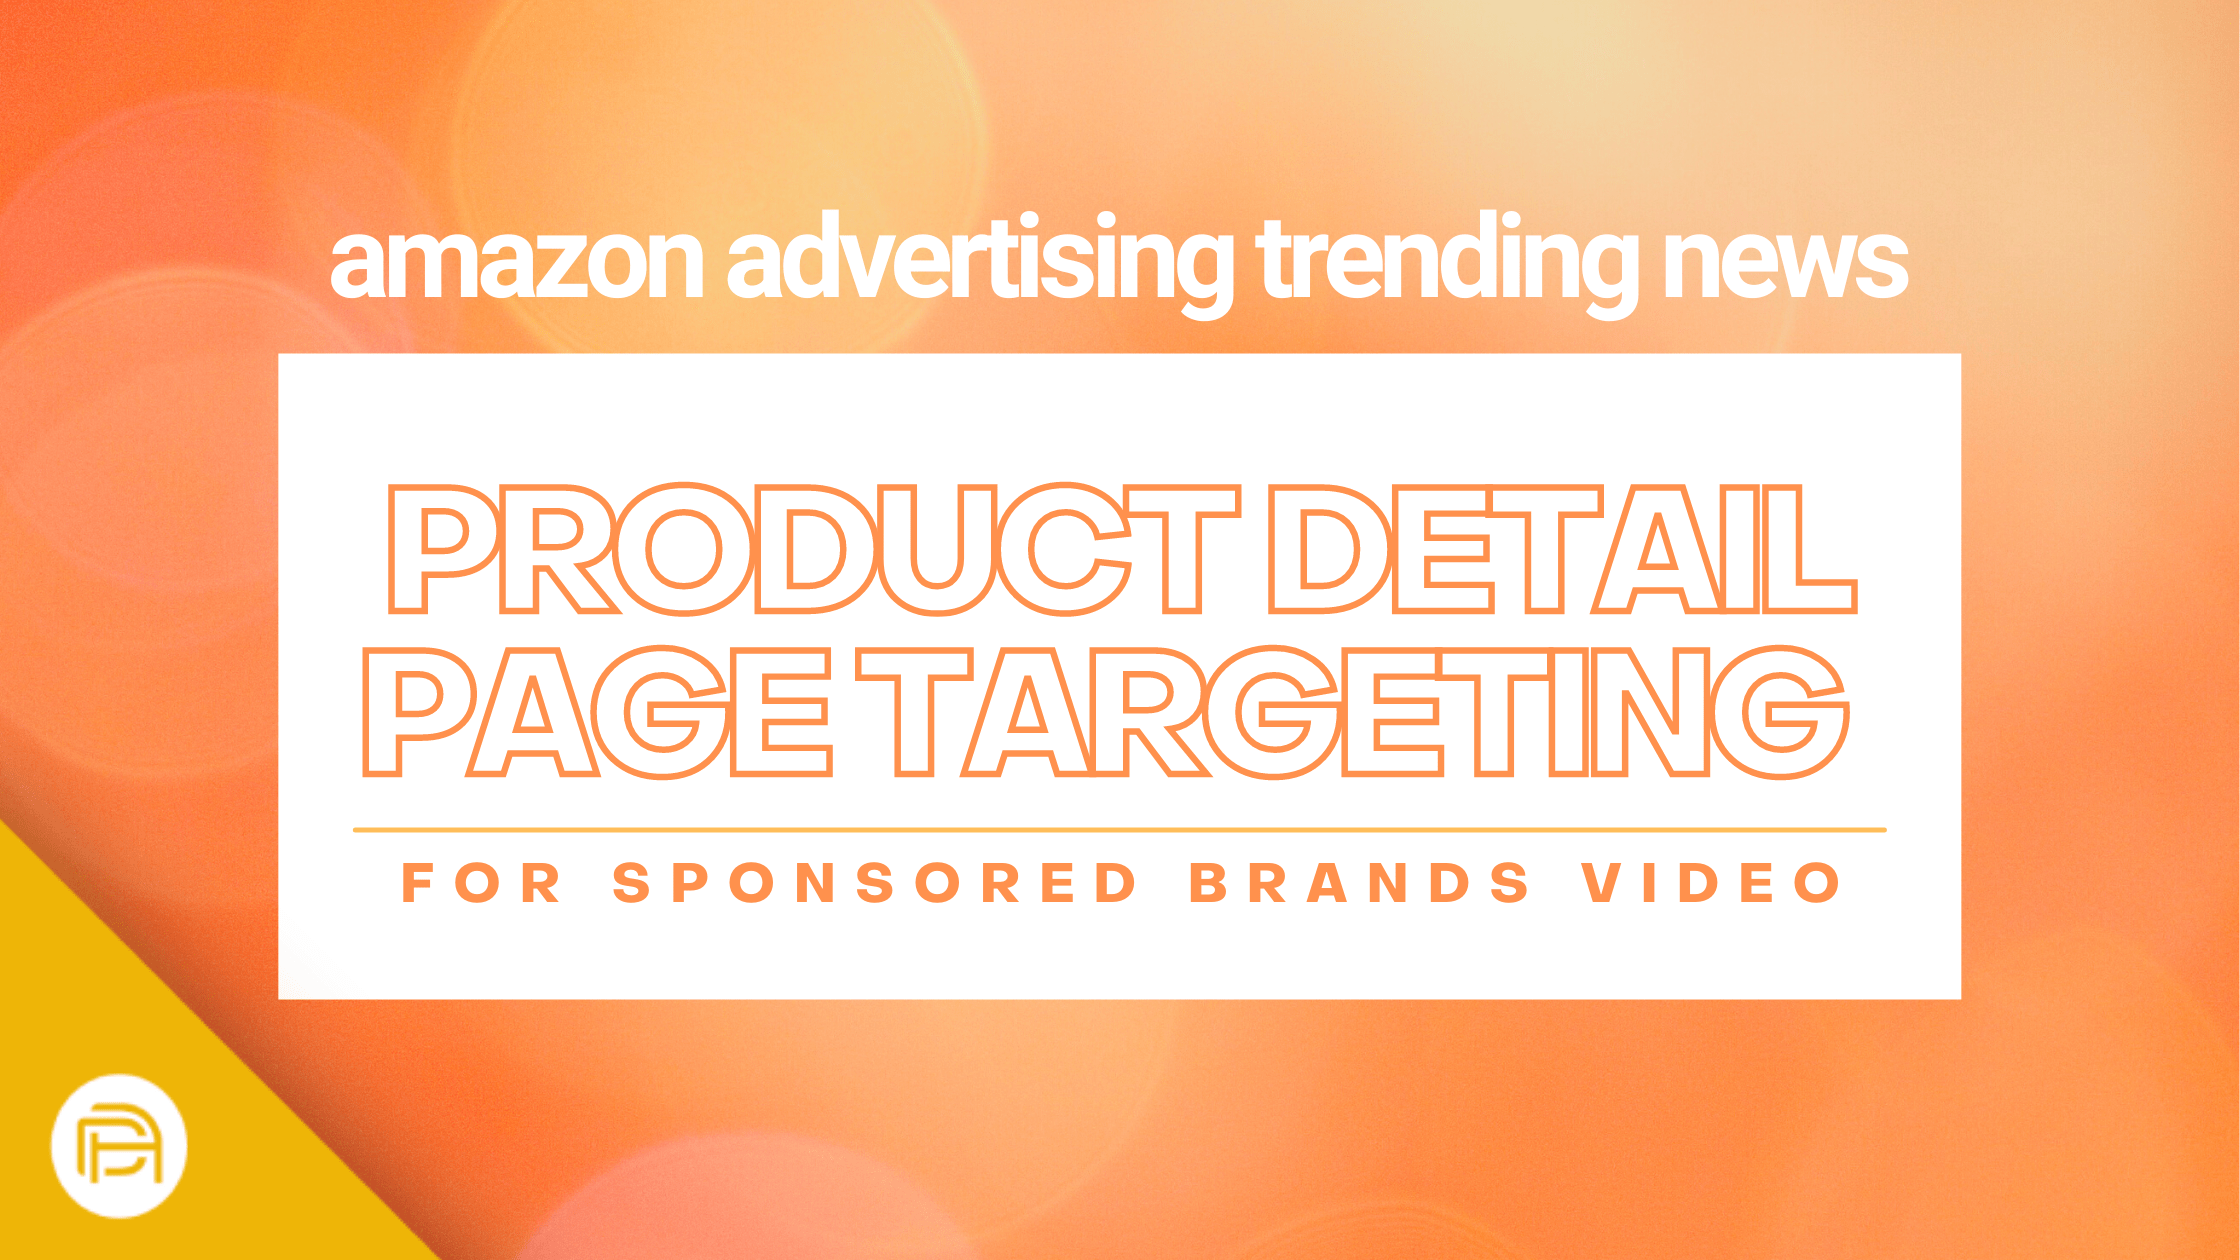 Amazon Advertising Trending News: Product Detail Page Targeting for Sponsored Brands Video